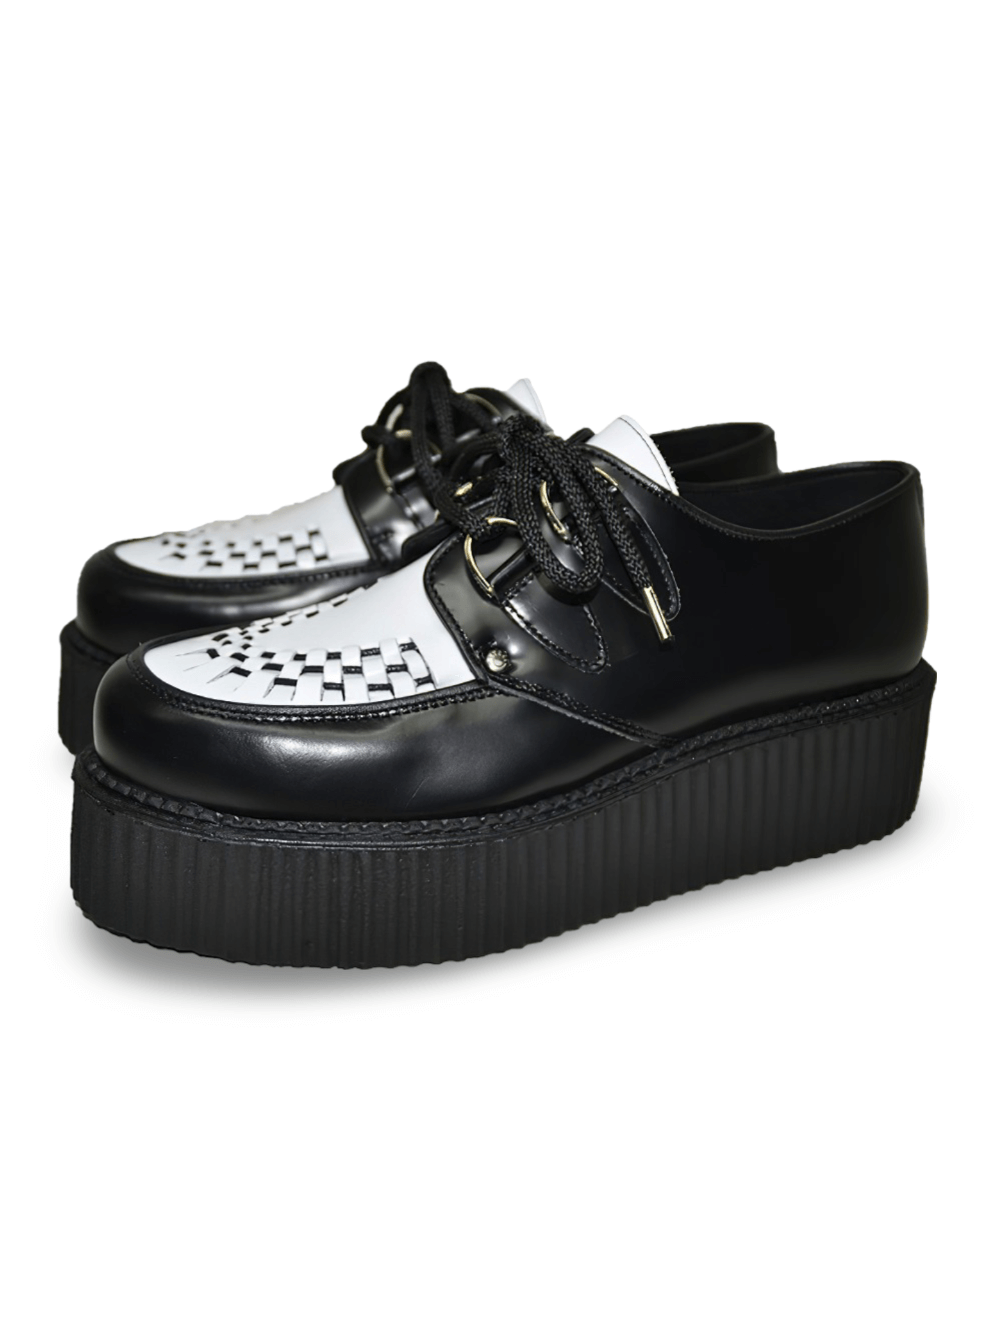 White And Black Creepers with Double Sole And Lace-Up